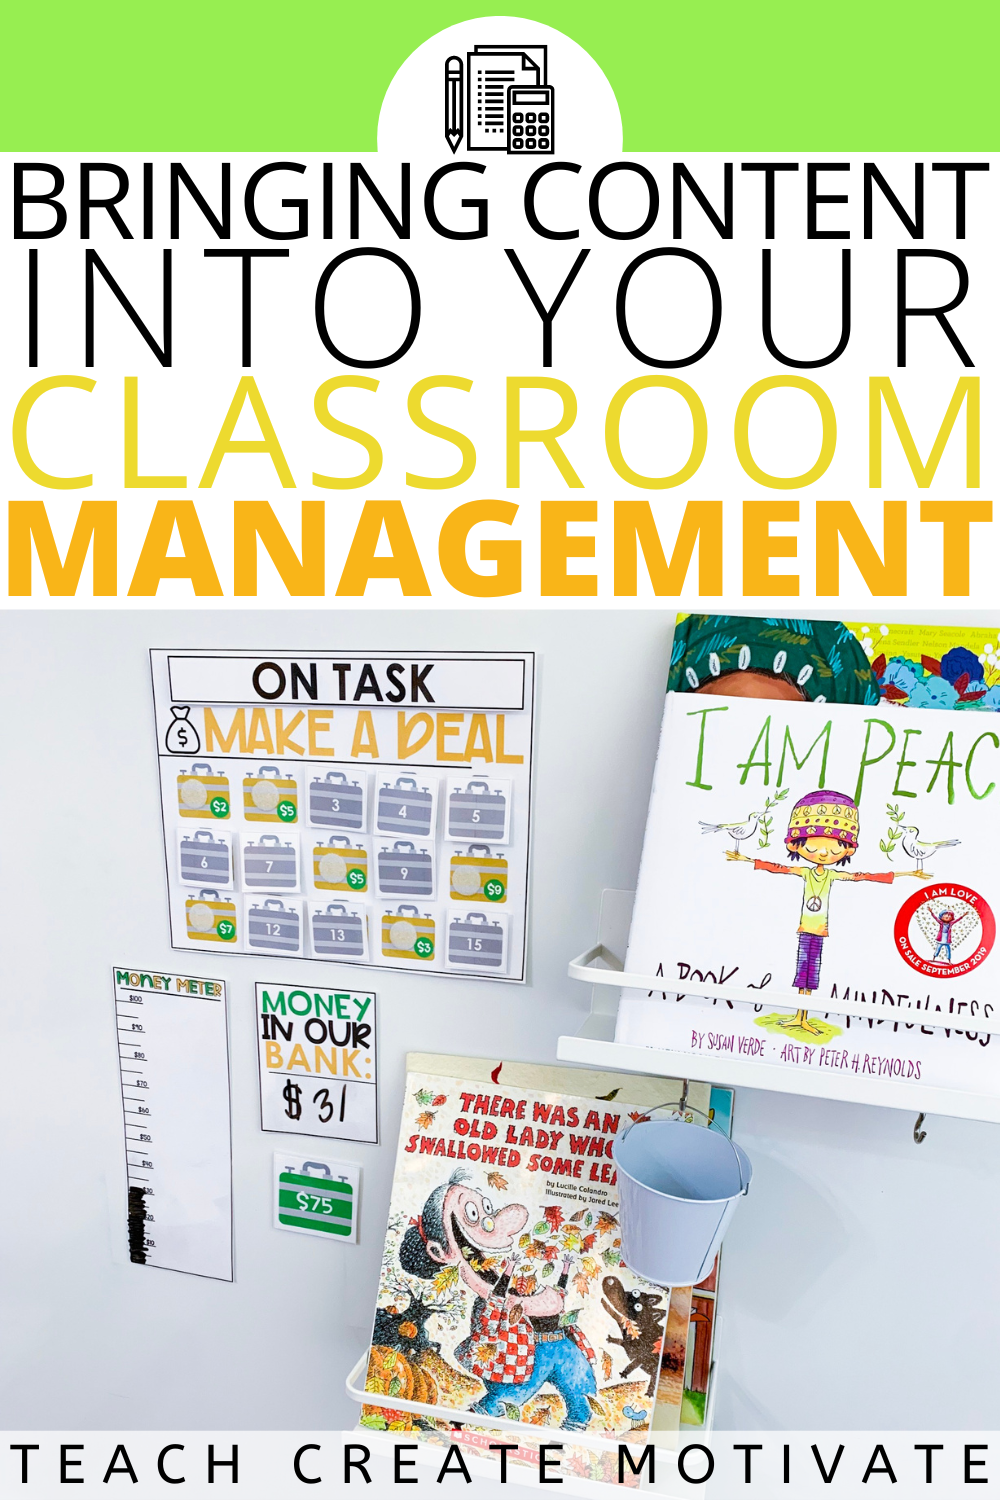 Bringing content into classroom management has never been easier than with this classroom management strategy. I don't know about you, but I'm always looking for ways I can tie academics and classroom management together. Classroom Management Make a Deal does just that! It is a great classroom management tool that targets specific expectations and hits on money and math skills. (elementary, 2nd grade, 3rd grade, 4th grade, 5th grade, classroom ideas)